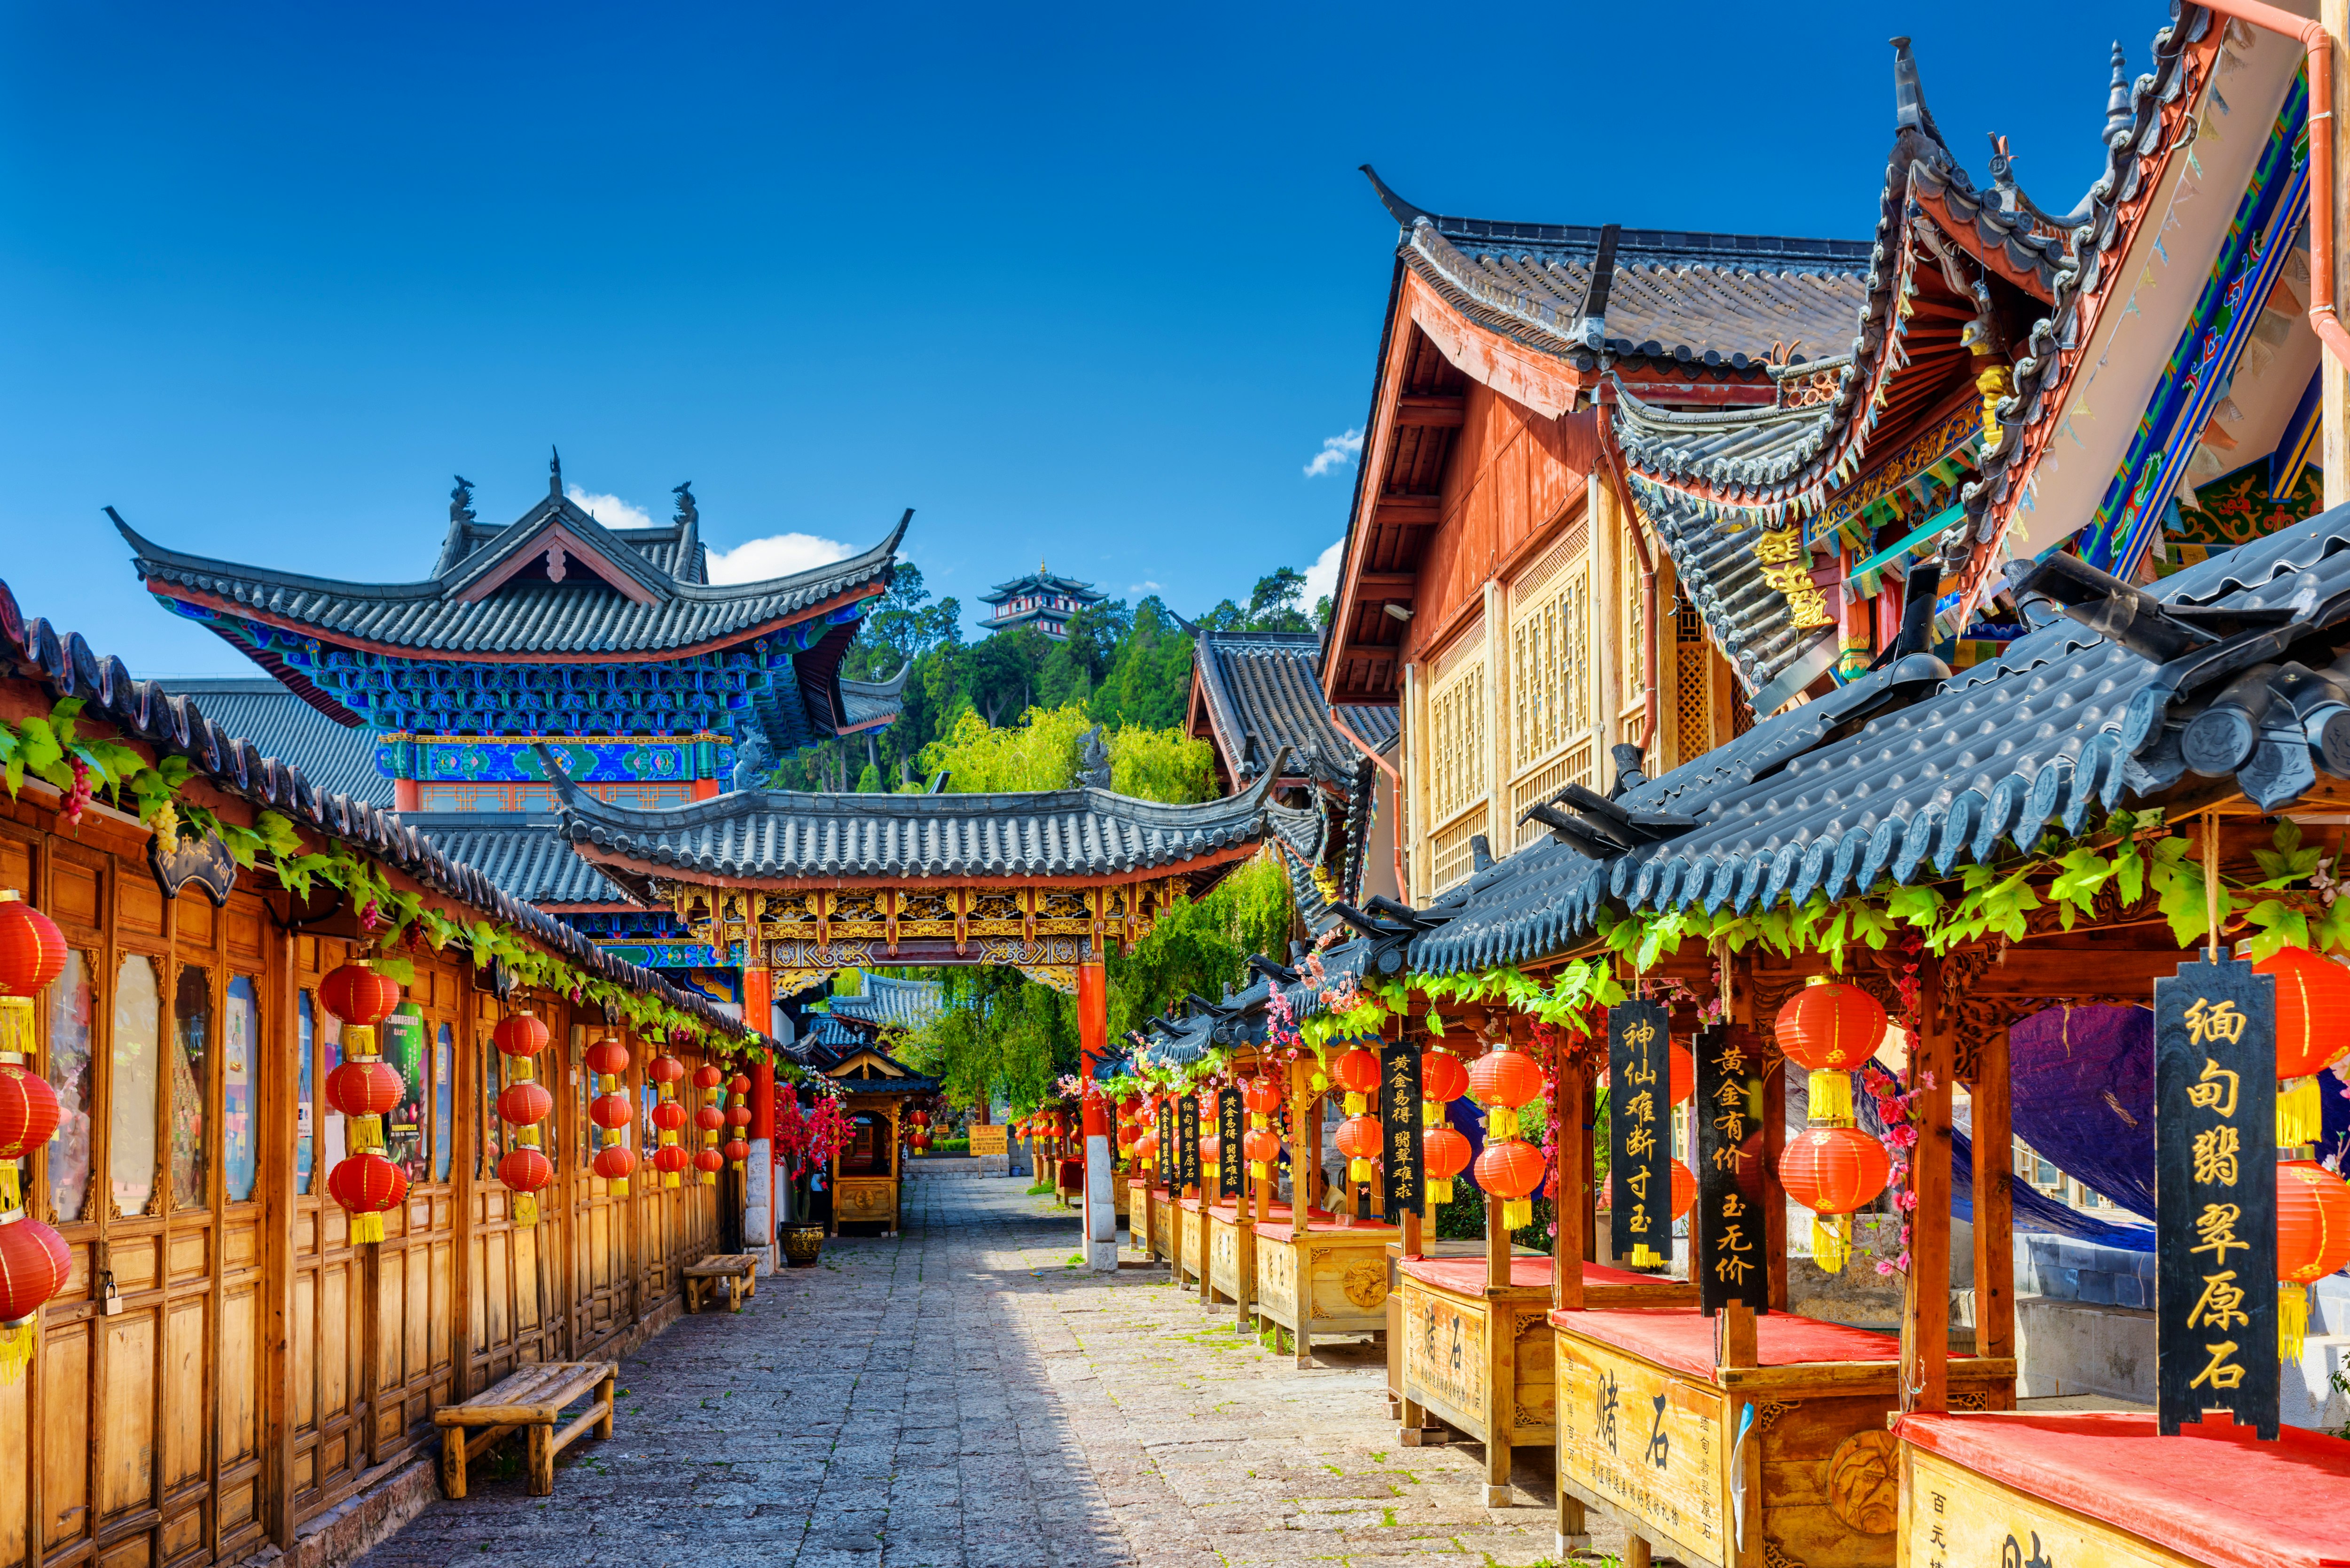 LIJIANG  YUNNAN PROVINCE  CHINA - OCTOBER 23  2015  Ancient street decorated with traditional Chinese red lanterns in the Old Town of Lijiang  Lijiang is a popular tourist destination of Asia  – © efired - Fotolia